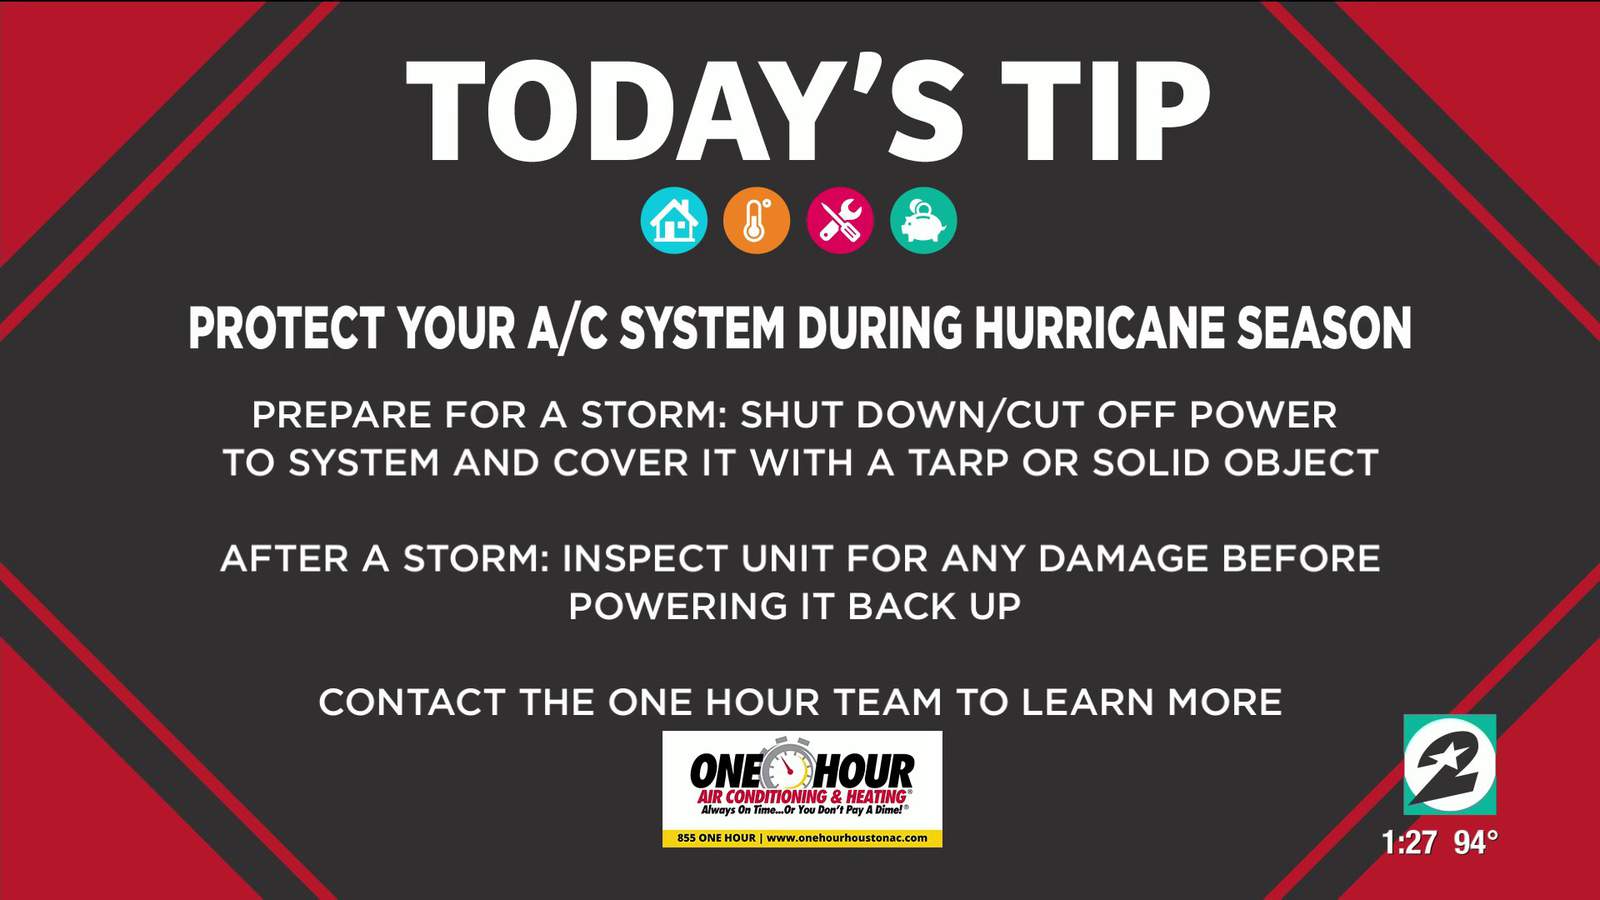 Tip Tuesday: How to protect your air conditioning system during hurricane season